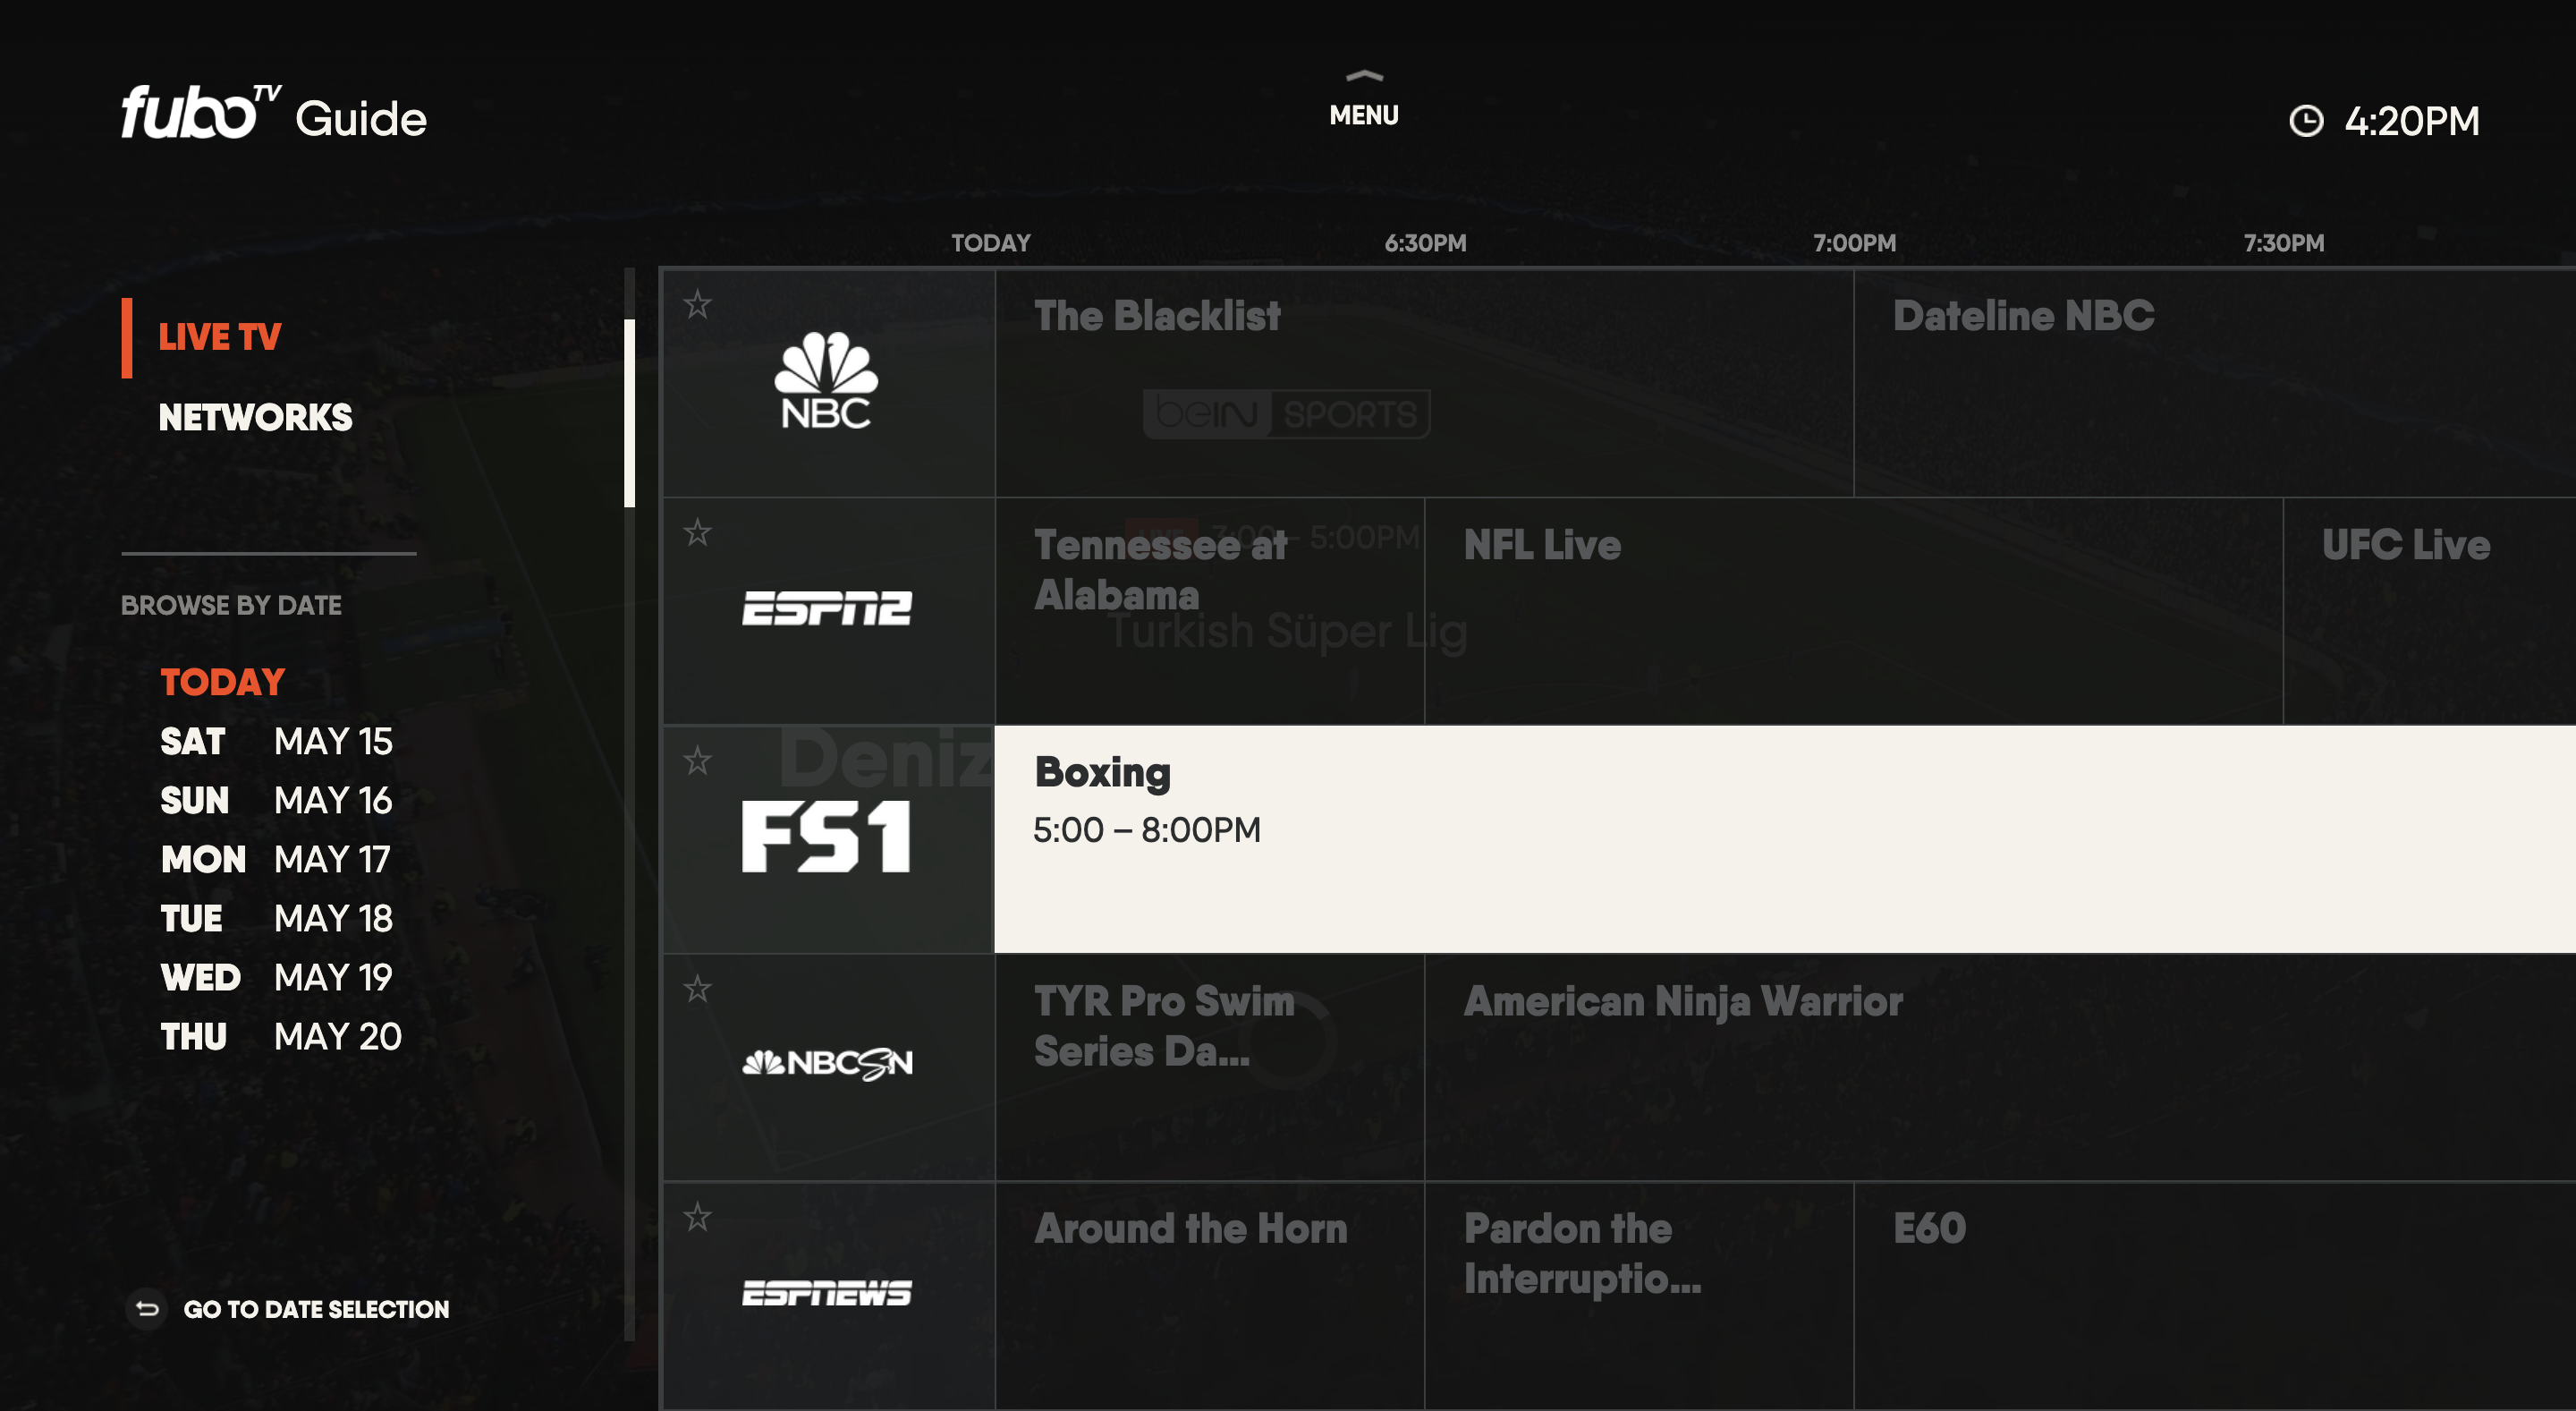 Channel guide for the FuboTV app on LG TV with an upcoming program highlighted